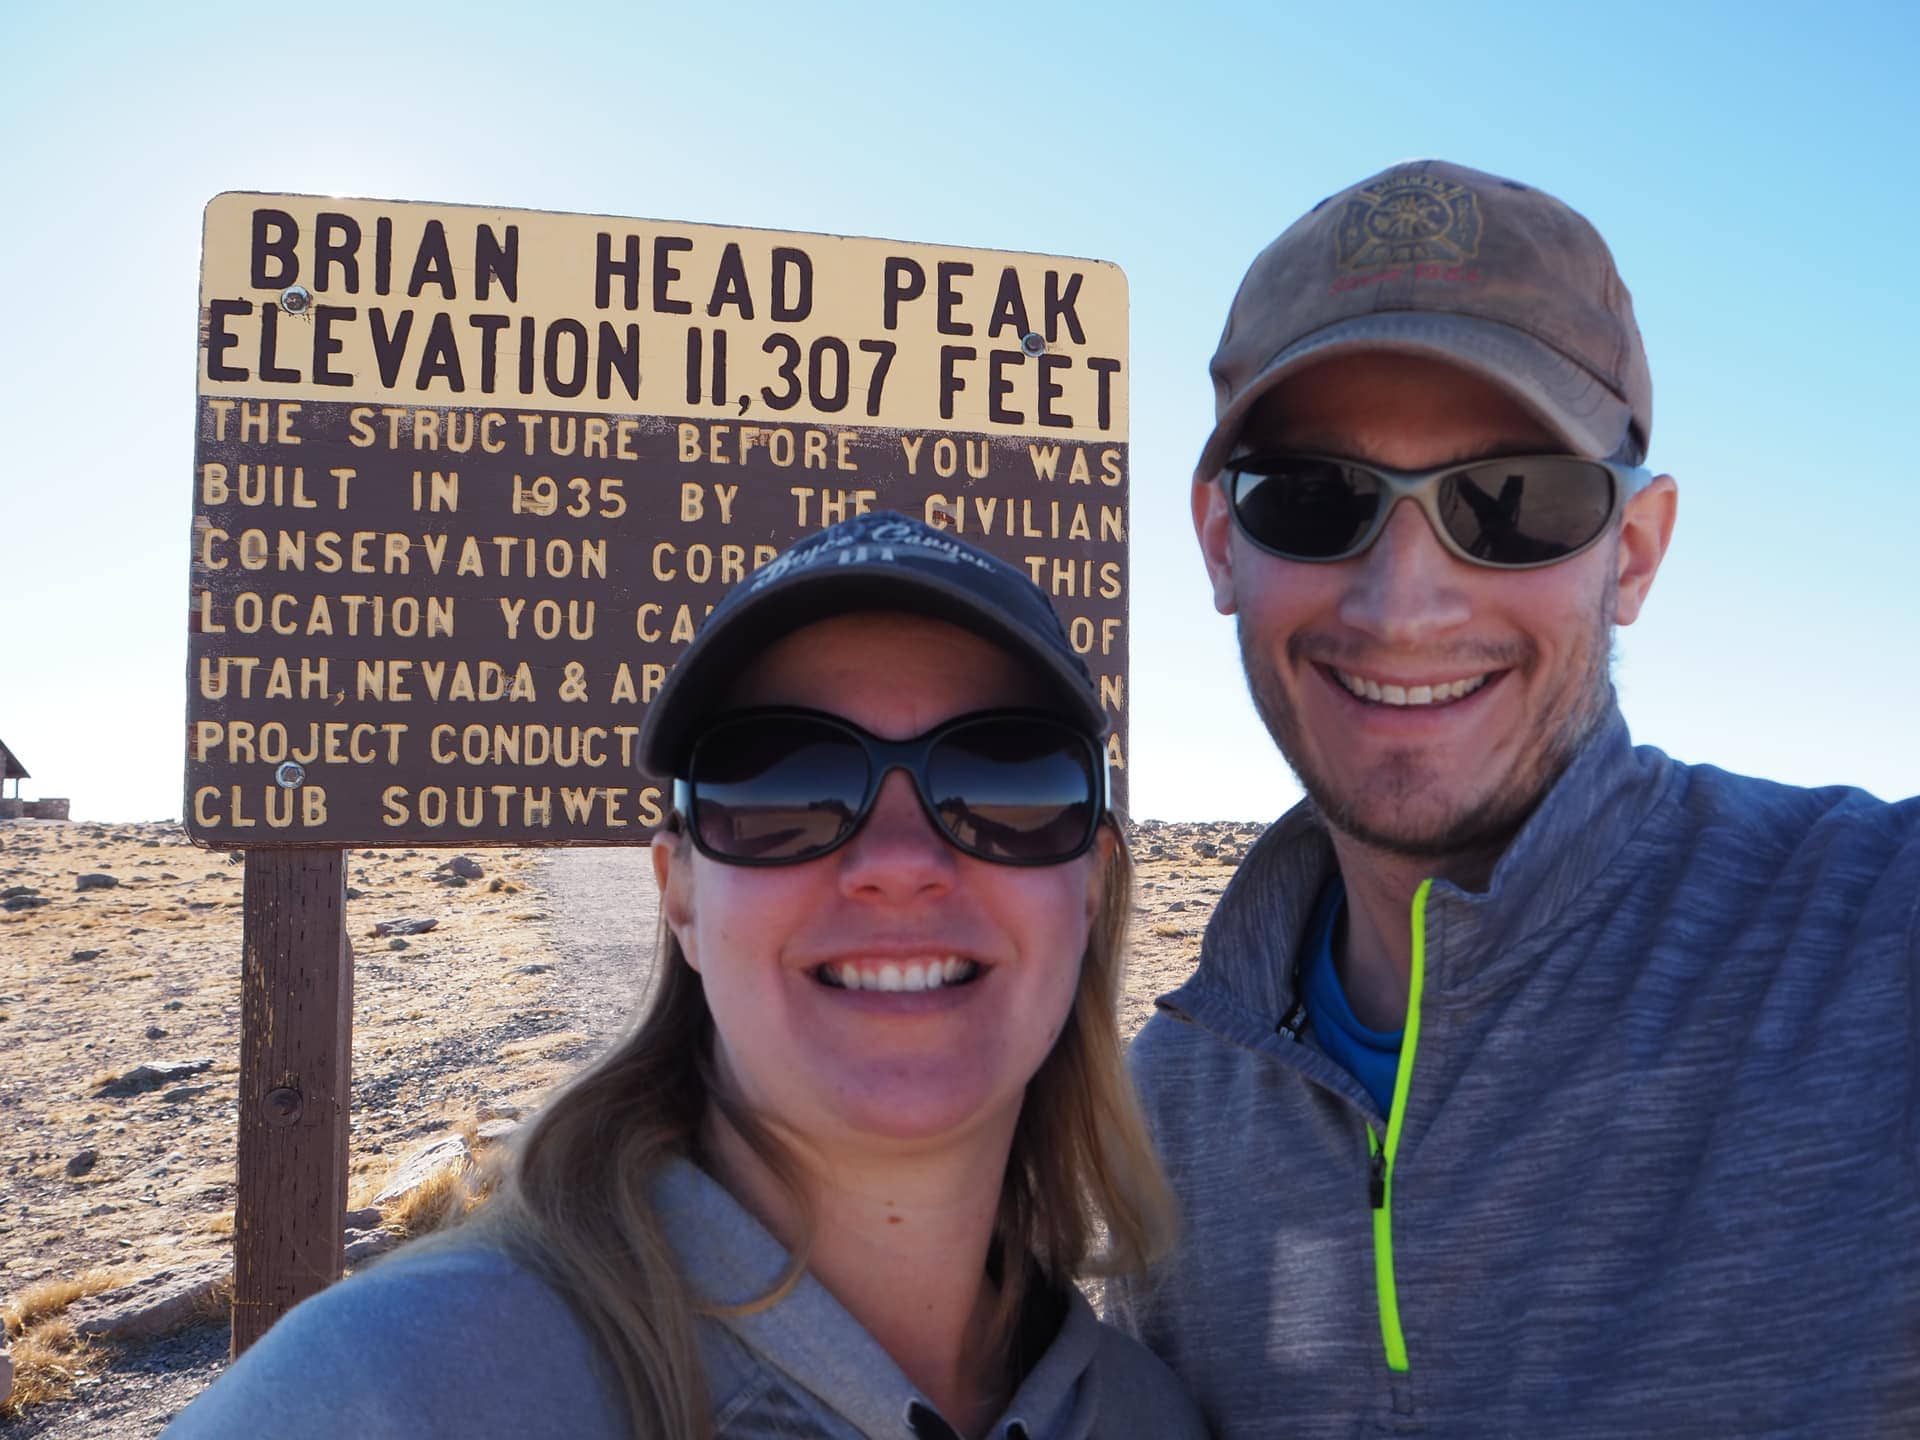 Keith and Lindsey at the top of Brian Head Peak